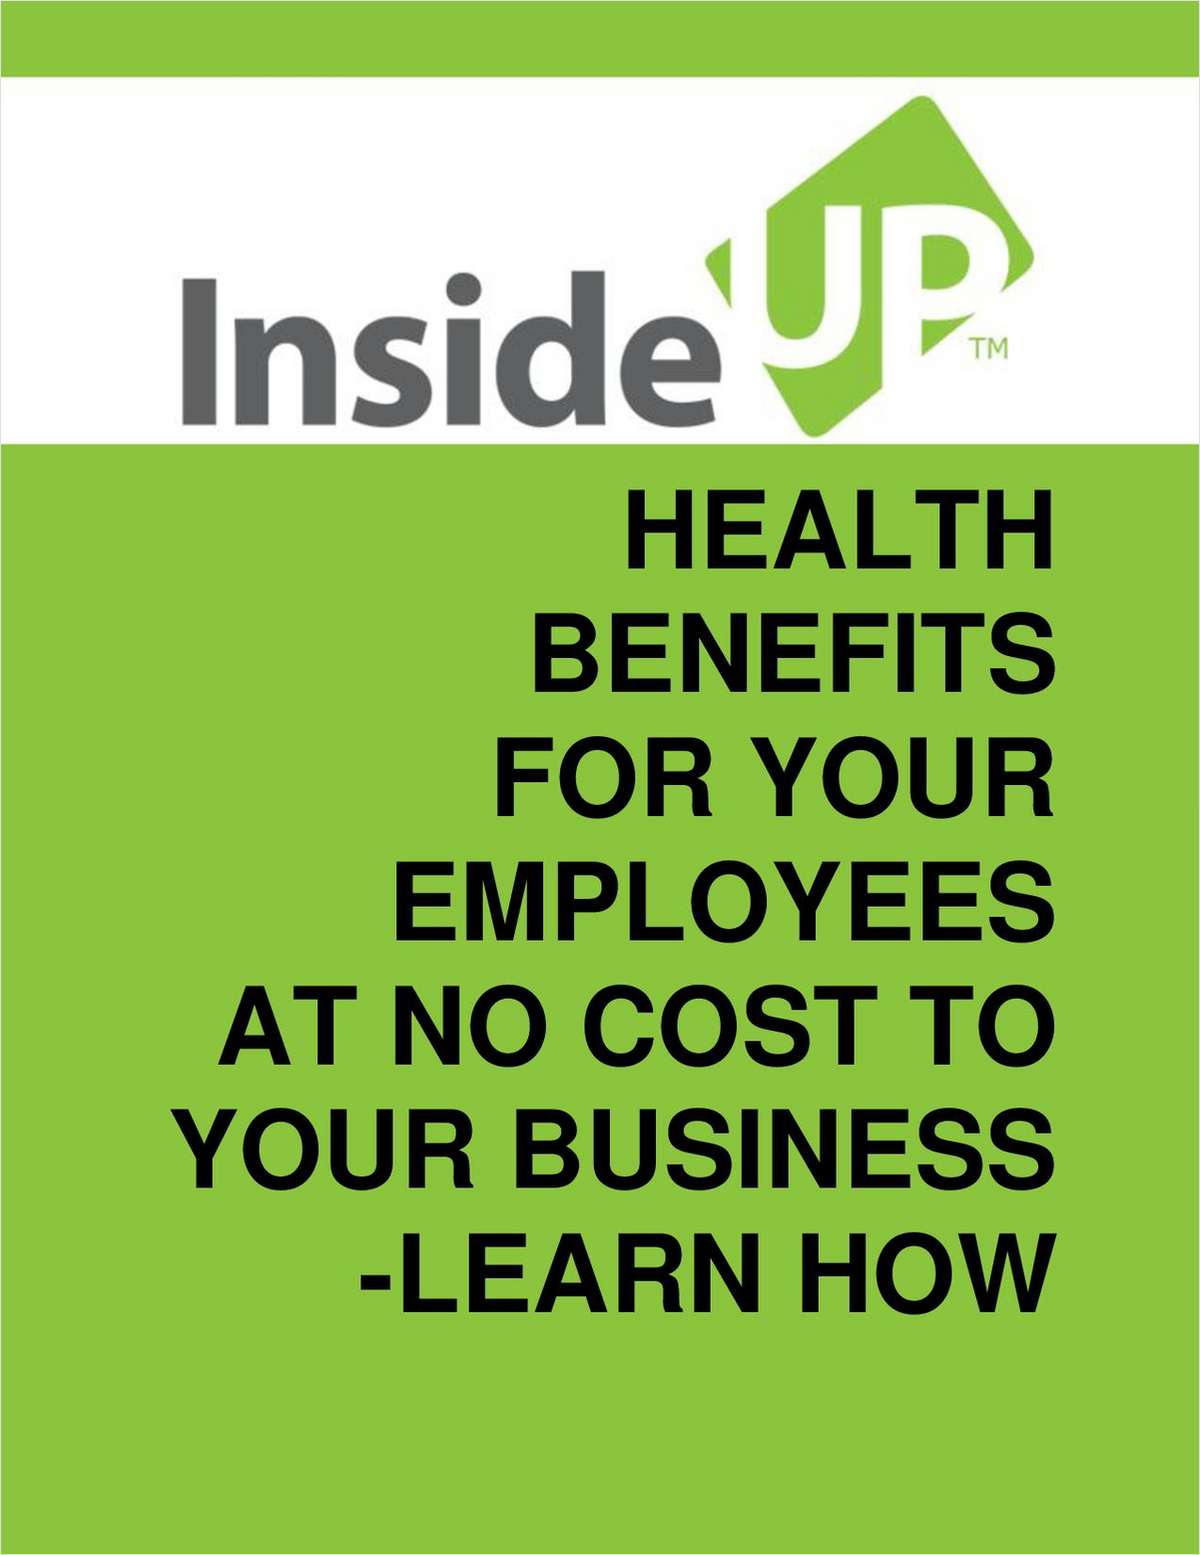 How To Offer Health Benefits to Your Employees at No Cost to Your Business